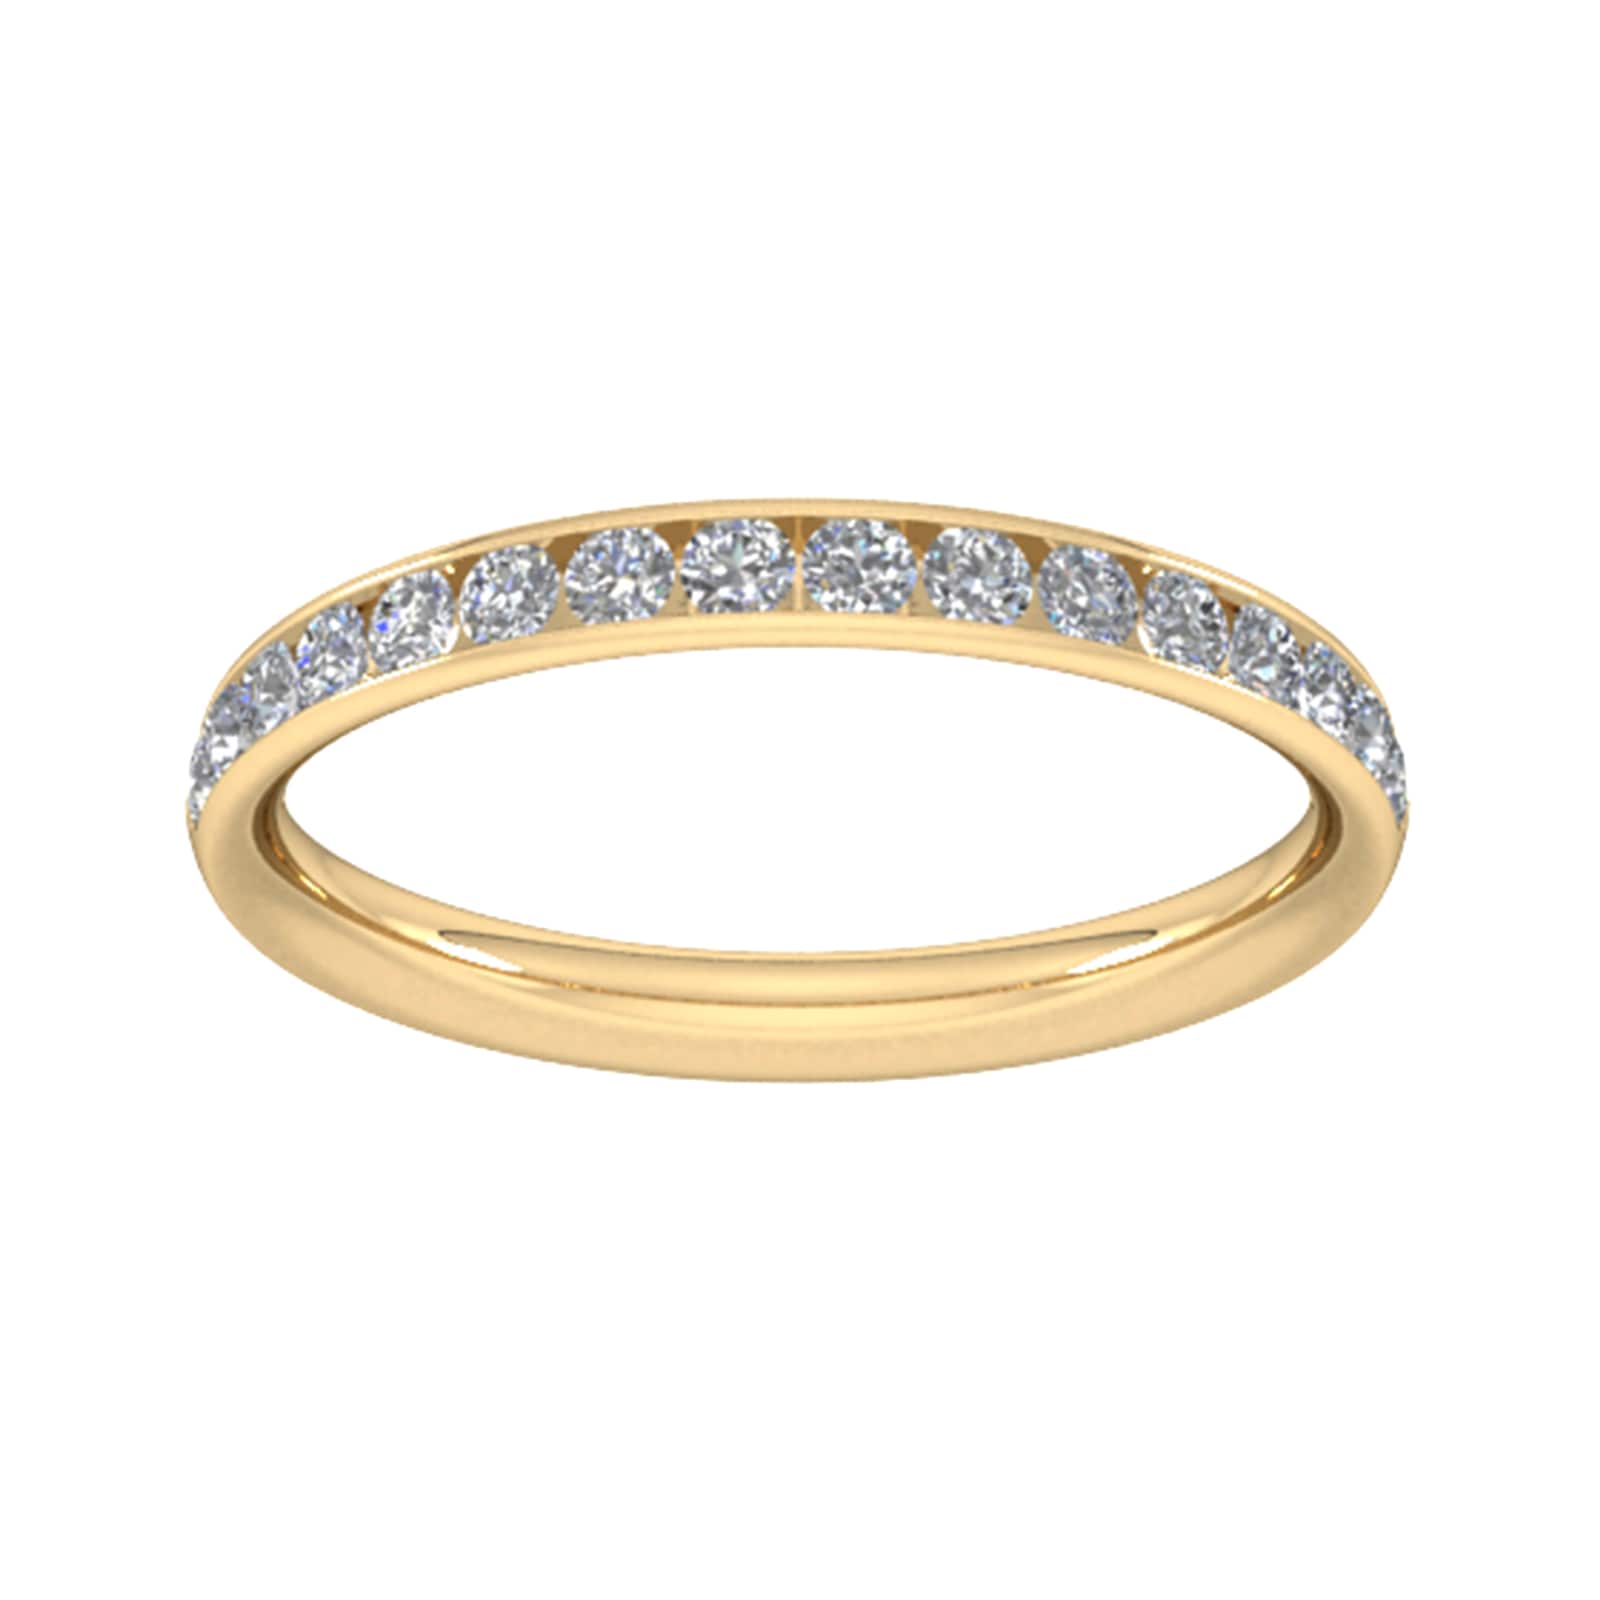 0.44 Carat Total Weight Half Channel Set Brilliant Cut Diamond Wedding Ring In 9 Carat Yellow Gold - Ring Size H